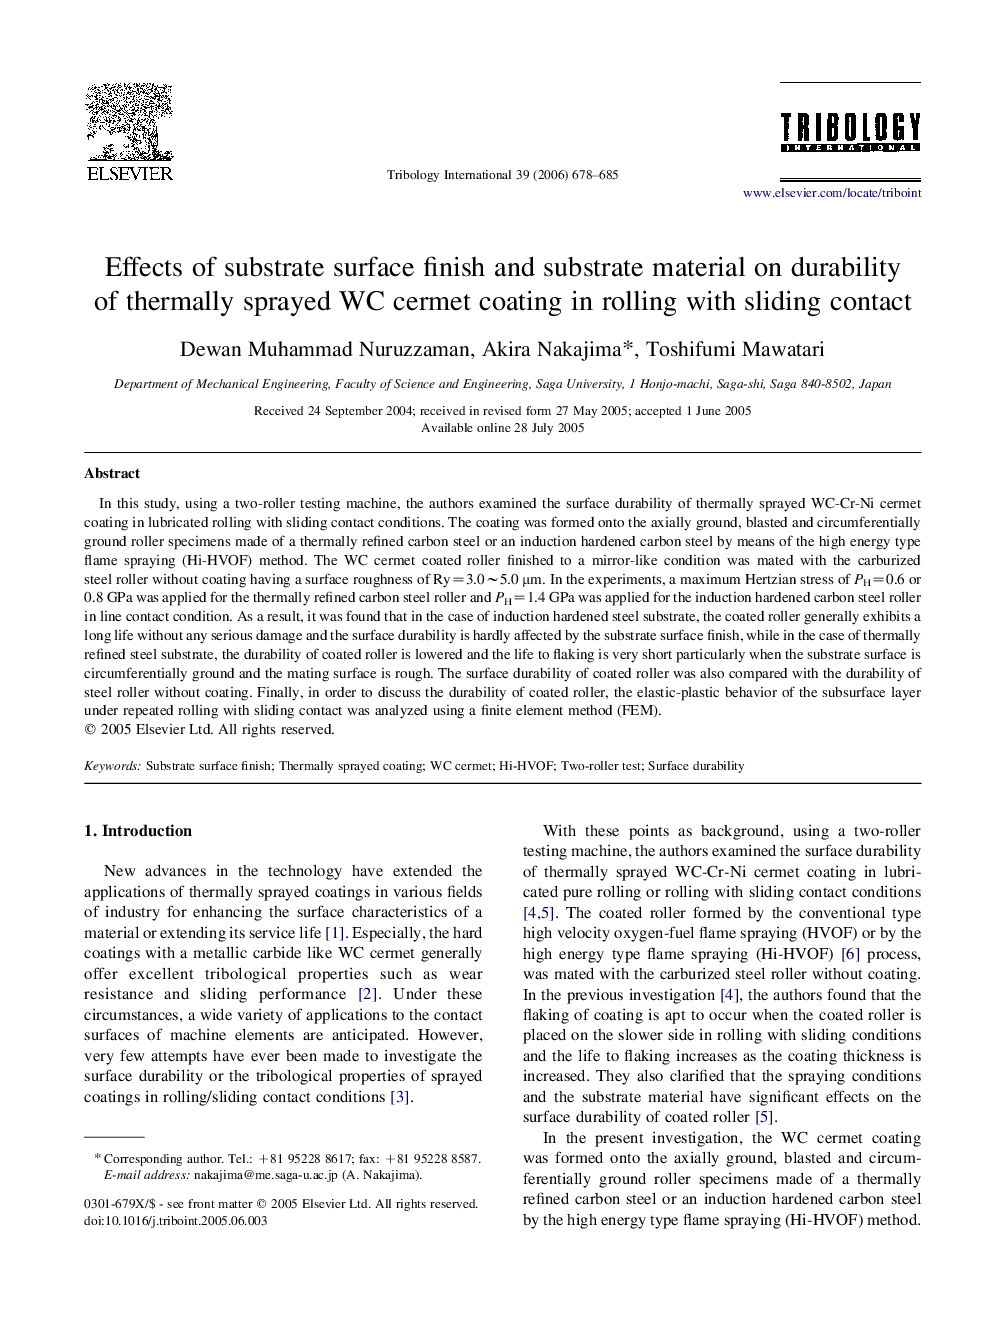 Effects of substrate surface finish and substrate material on durability of thermally sprayed WC cermet coating in rolling with sliding contact